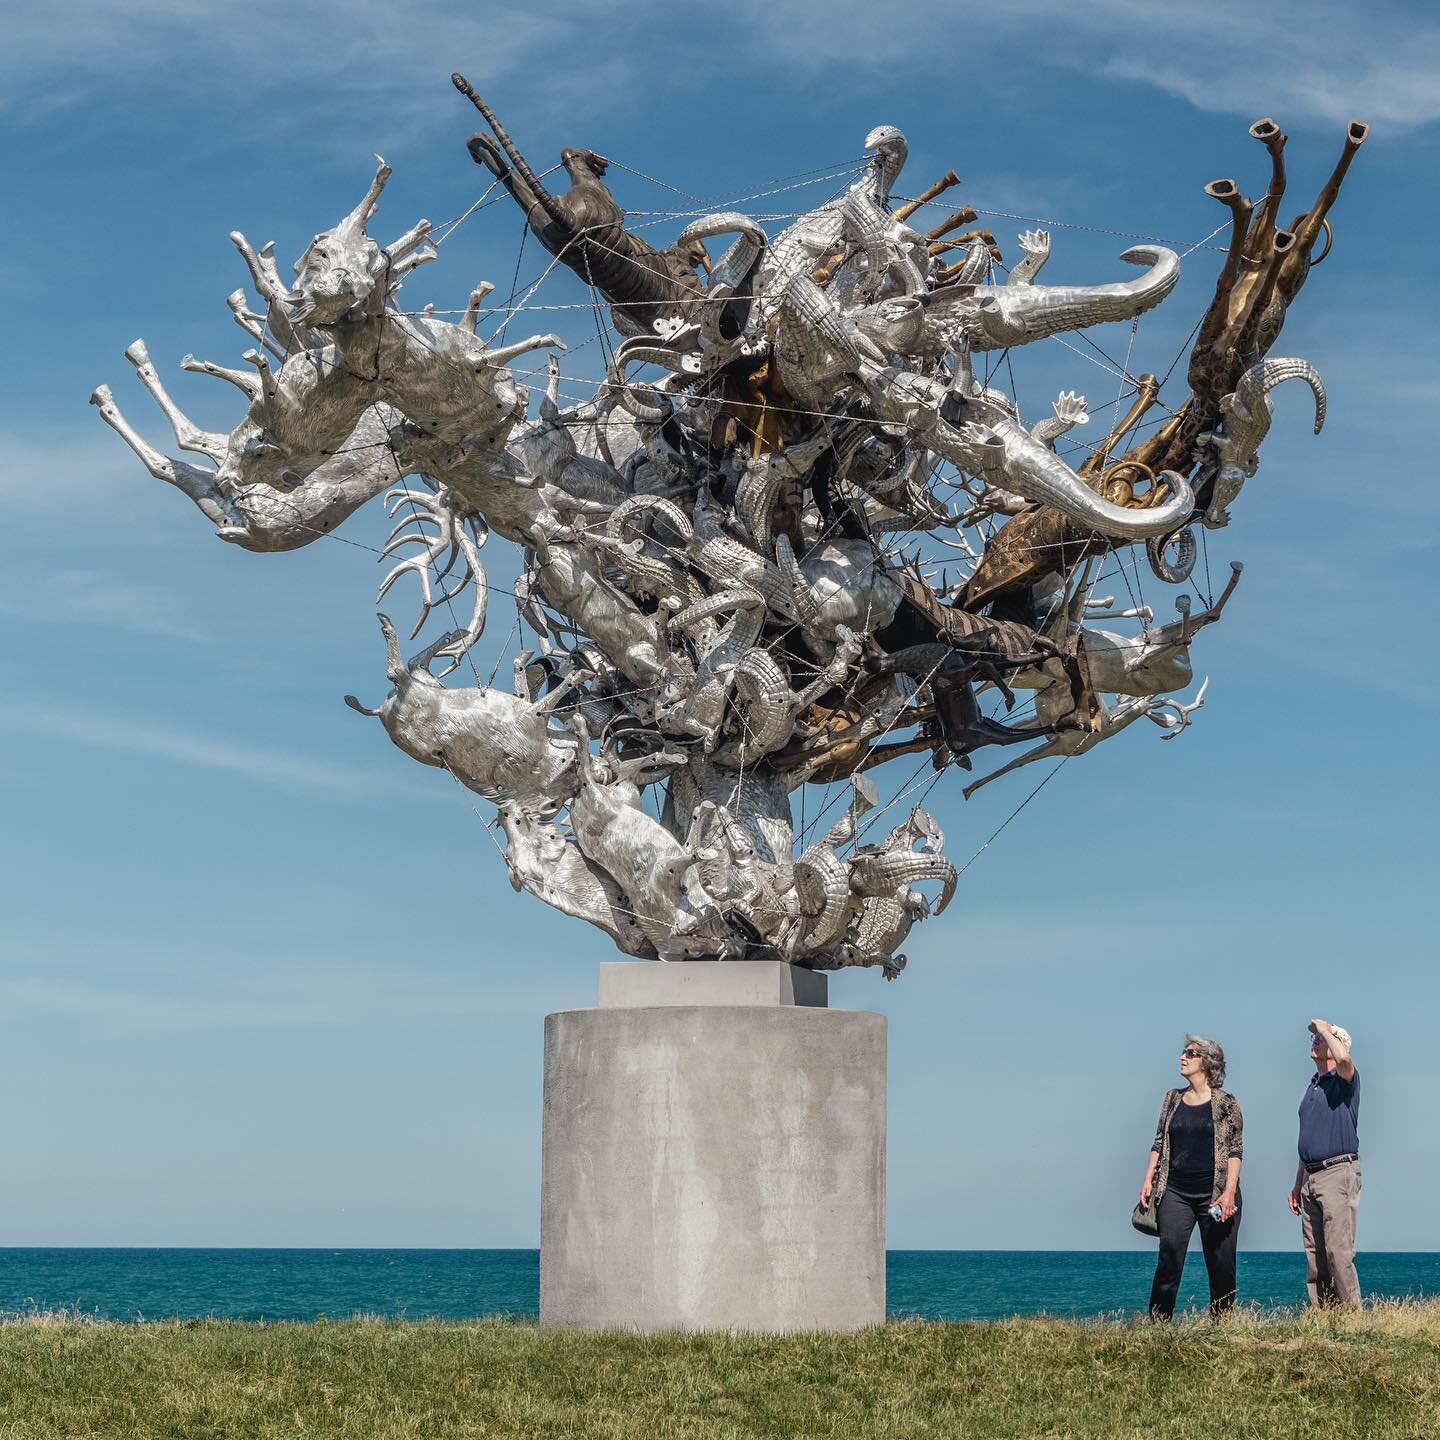 Writer and curator Pia Singh, @pia_singh9 in a lyrical review @hyperallergic of sculptor #NancyRubins, @nancyrubinsstudio whose work is on view along Lake Michigan&rsquo;s shoreline, asserts that the artist, who was worked with salvaged commercial an